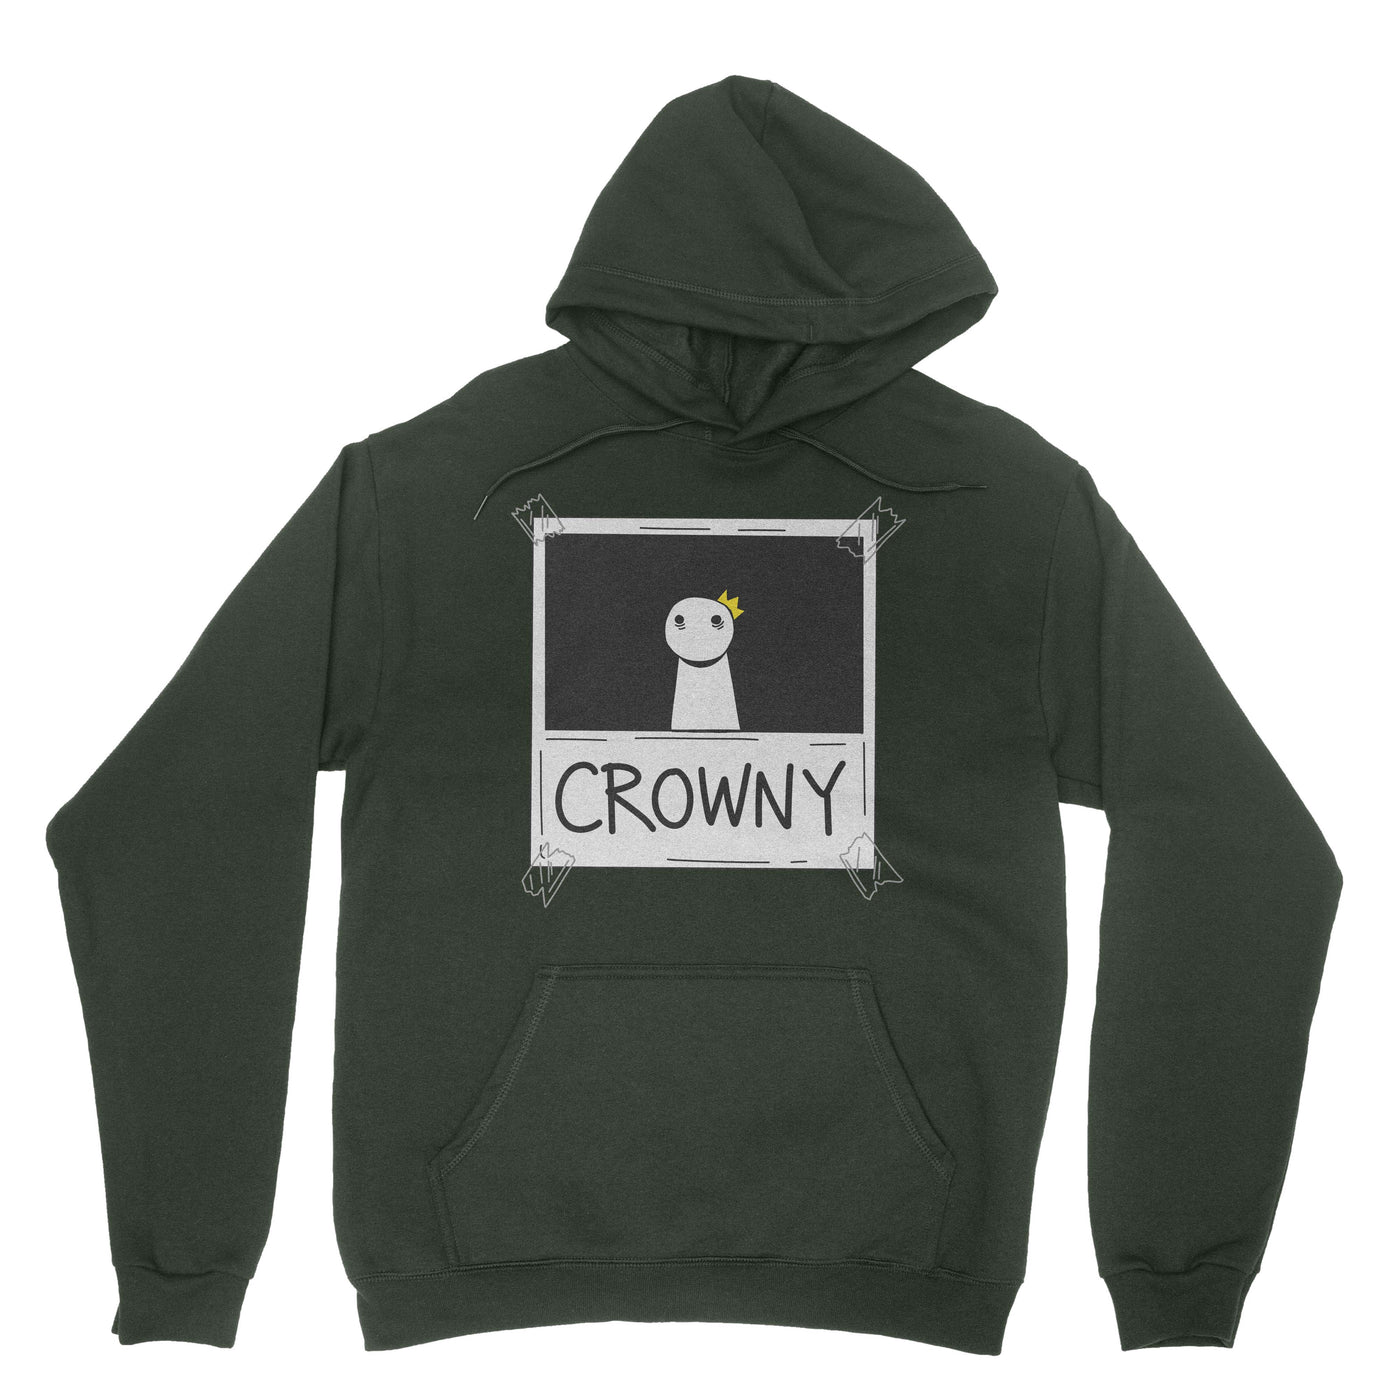 Crowny - Pullover Hoodie Military Green